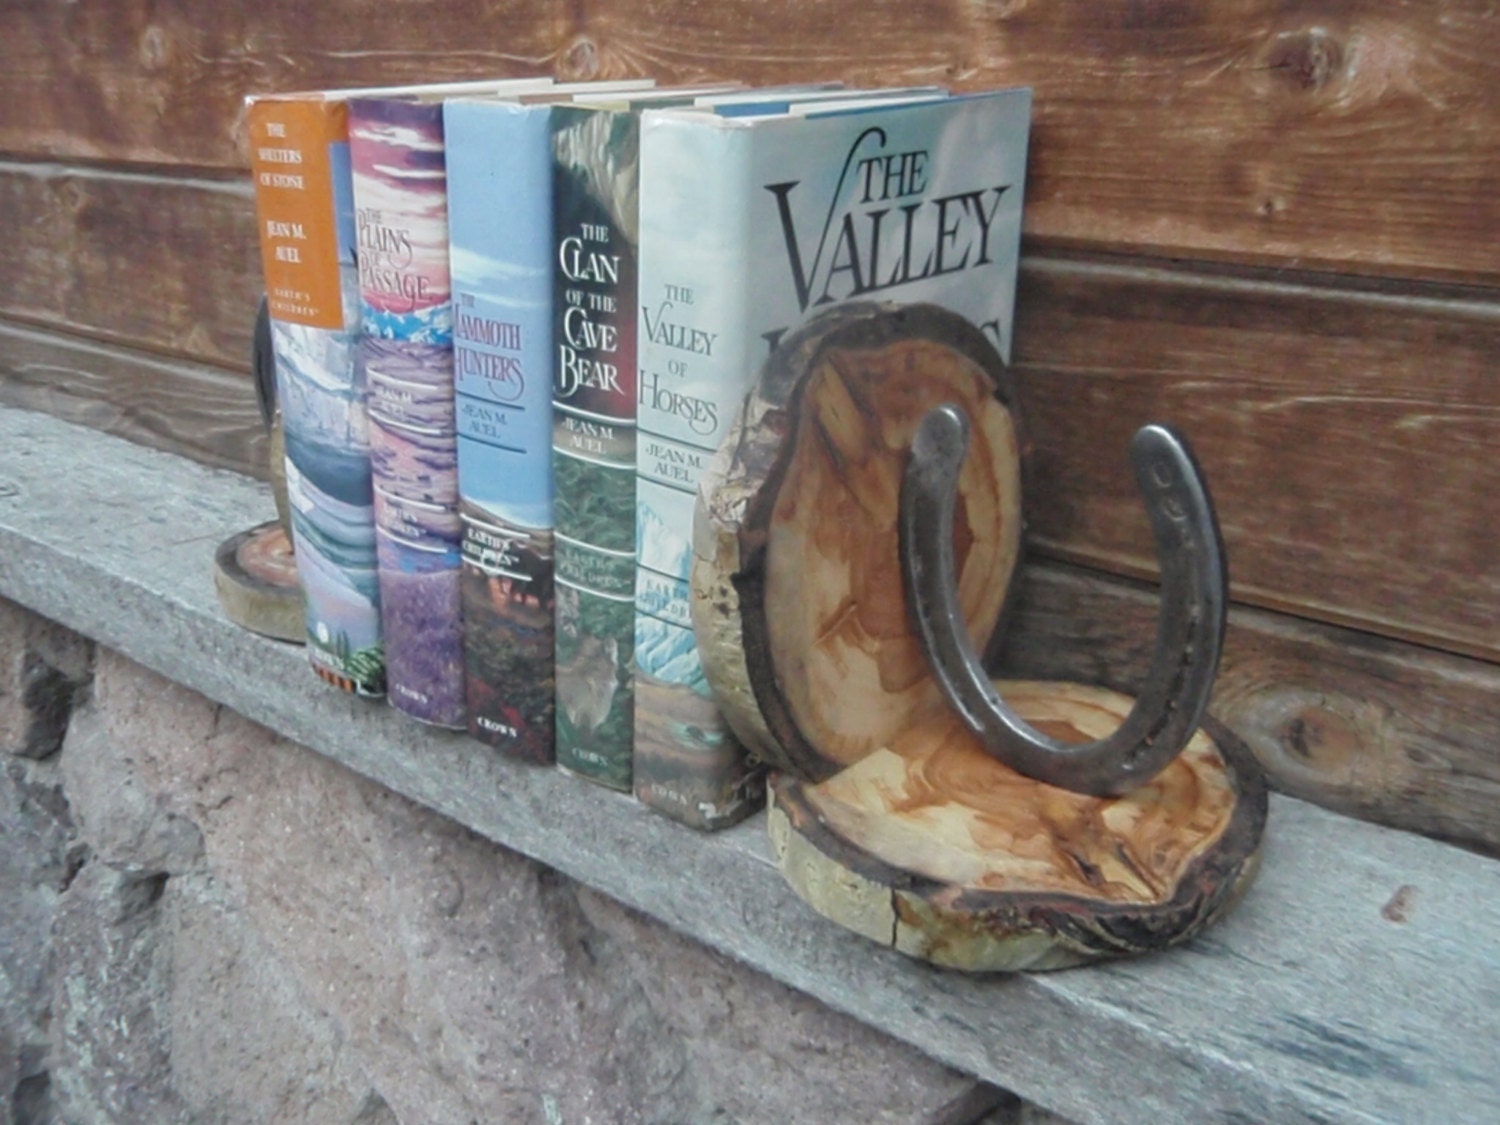 rustic bookends